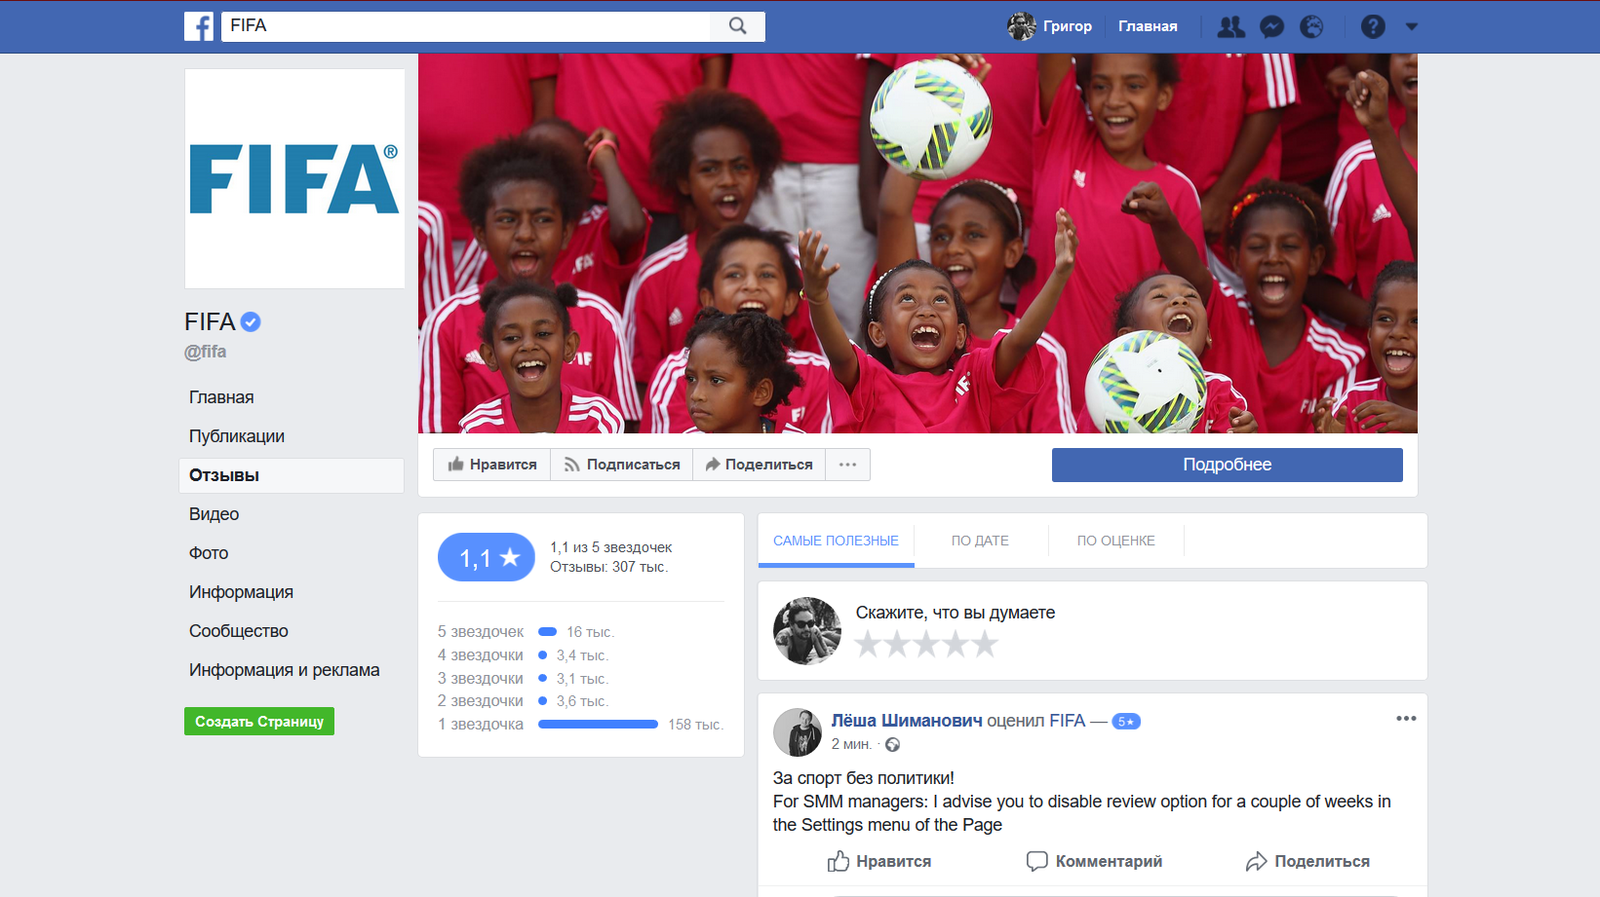 Due to scandal with the Croatian national team, the rating of the FIFA page on Facebook fell to a score of 1.1 - FIFA, Croatia, Facebook, Page, Rating, 2018 FIFA World Cup, Croatia national team